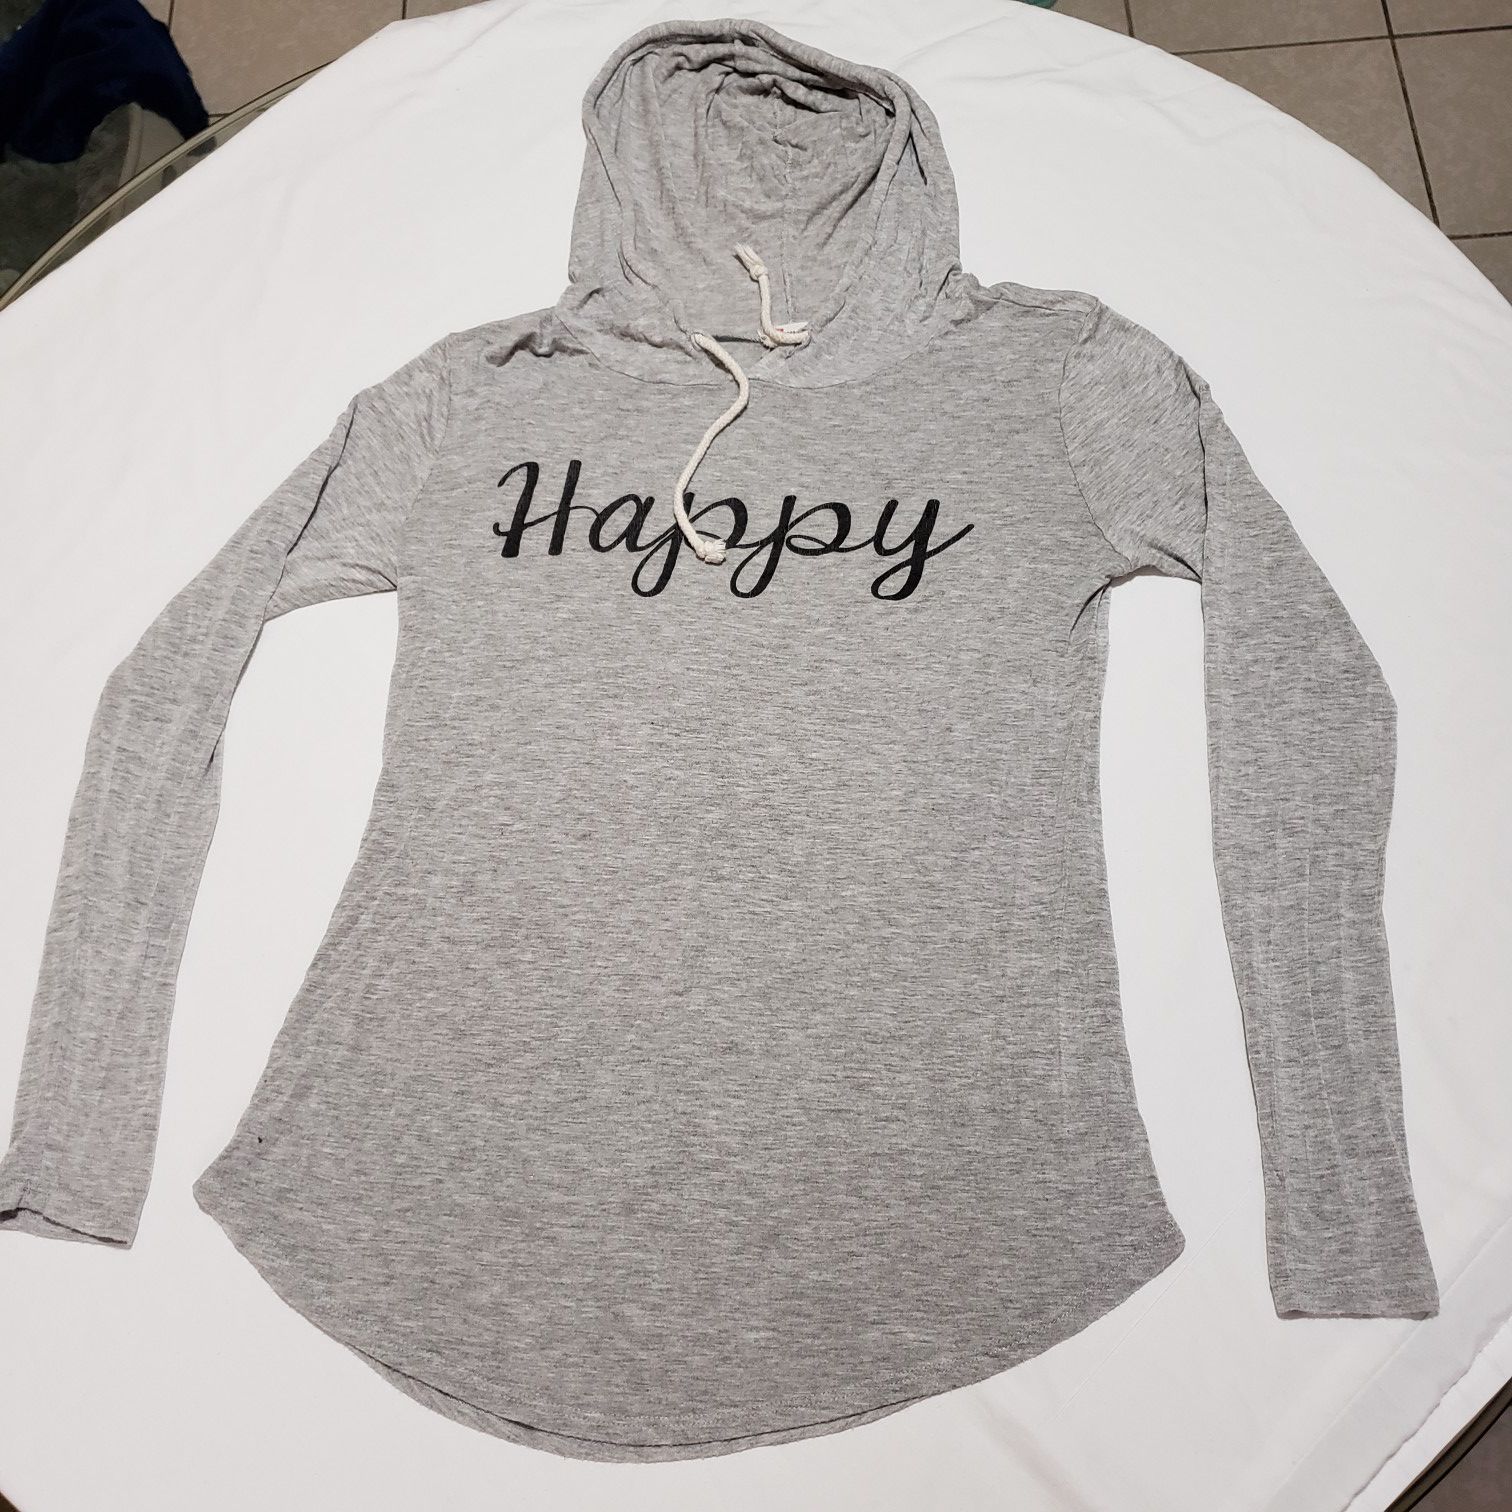 French Pastry Happy Hoodie Pullover Sweatshirt